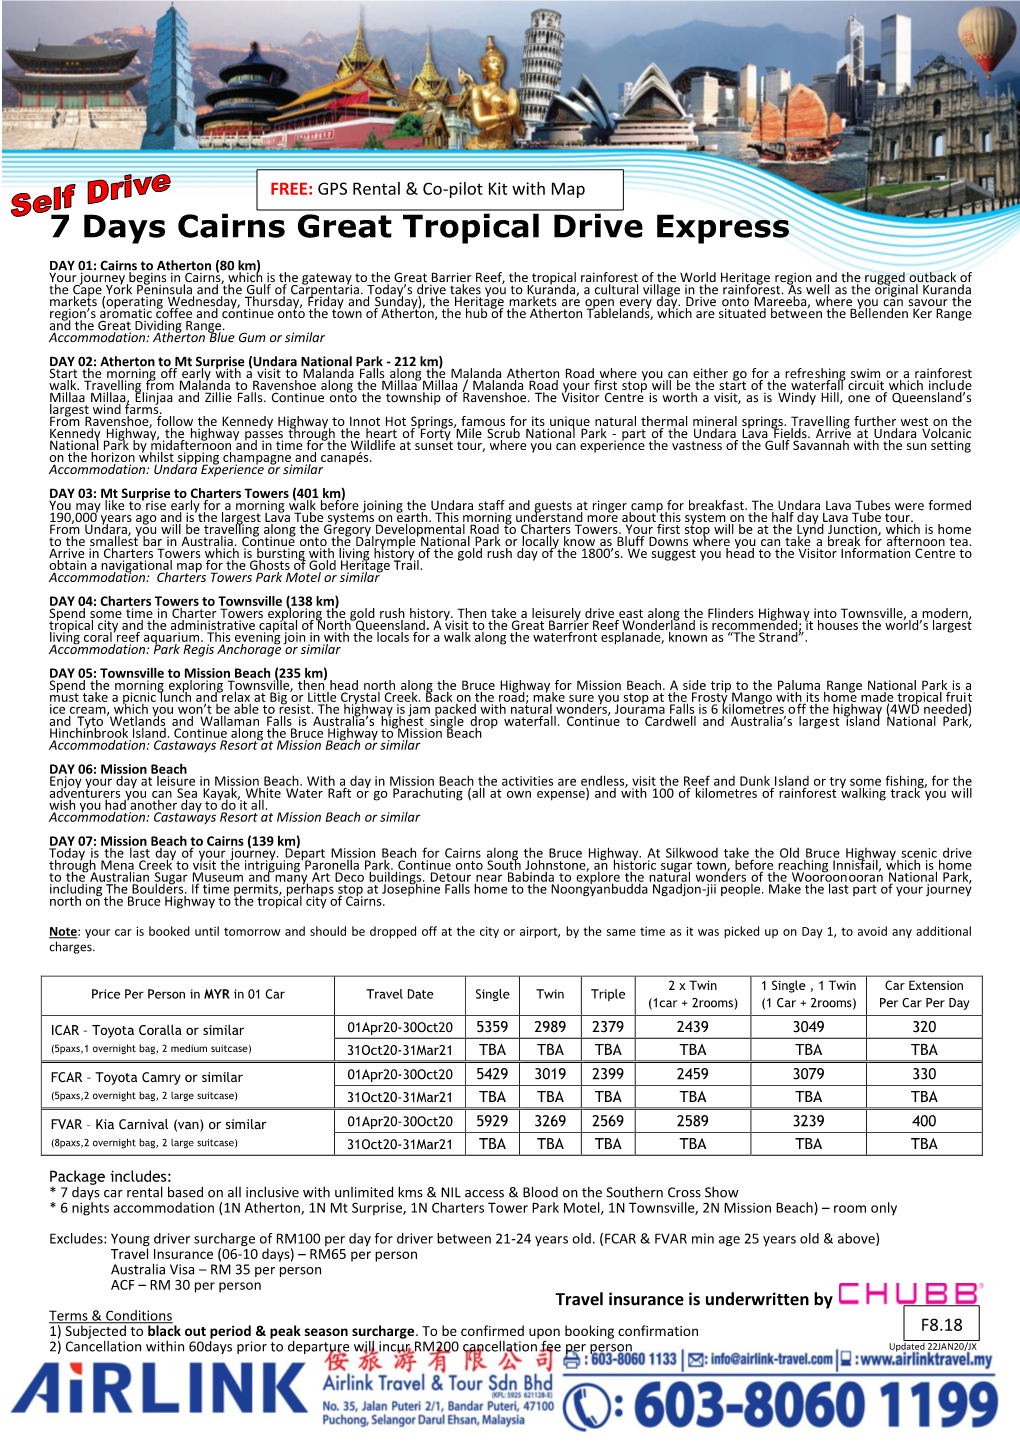 7 Days Cairns Great Tropical Drive Express